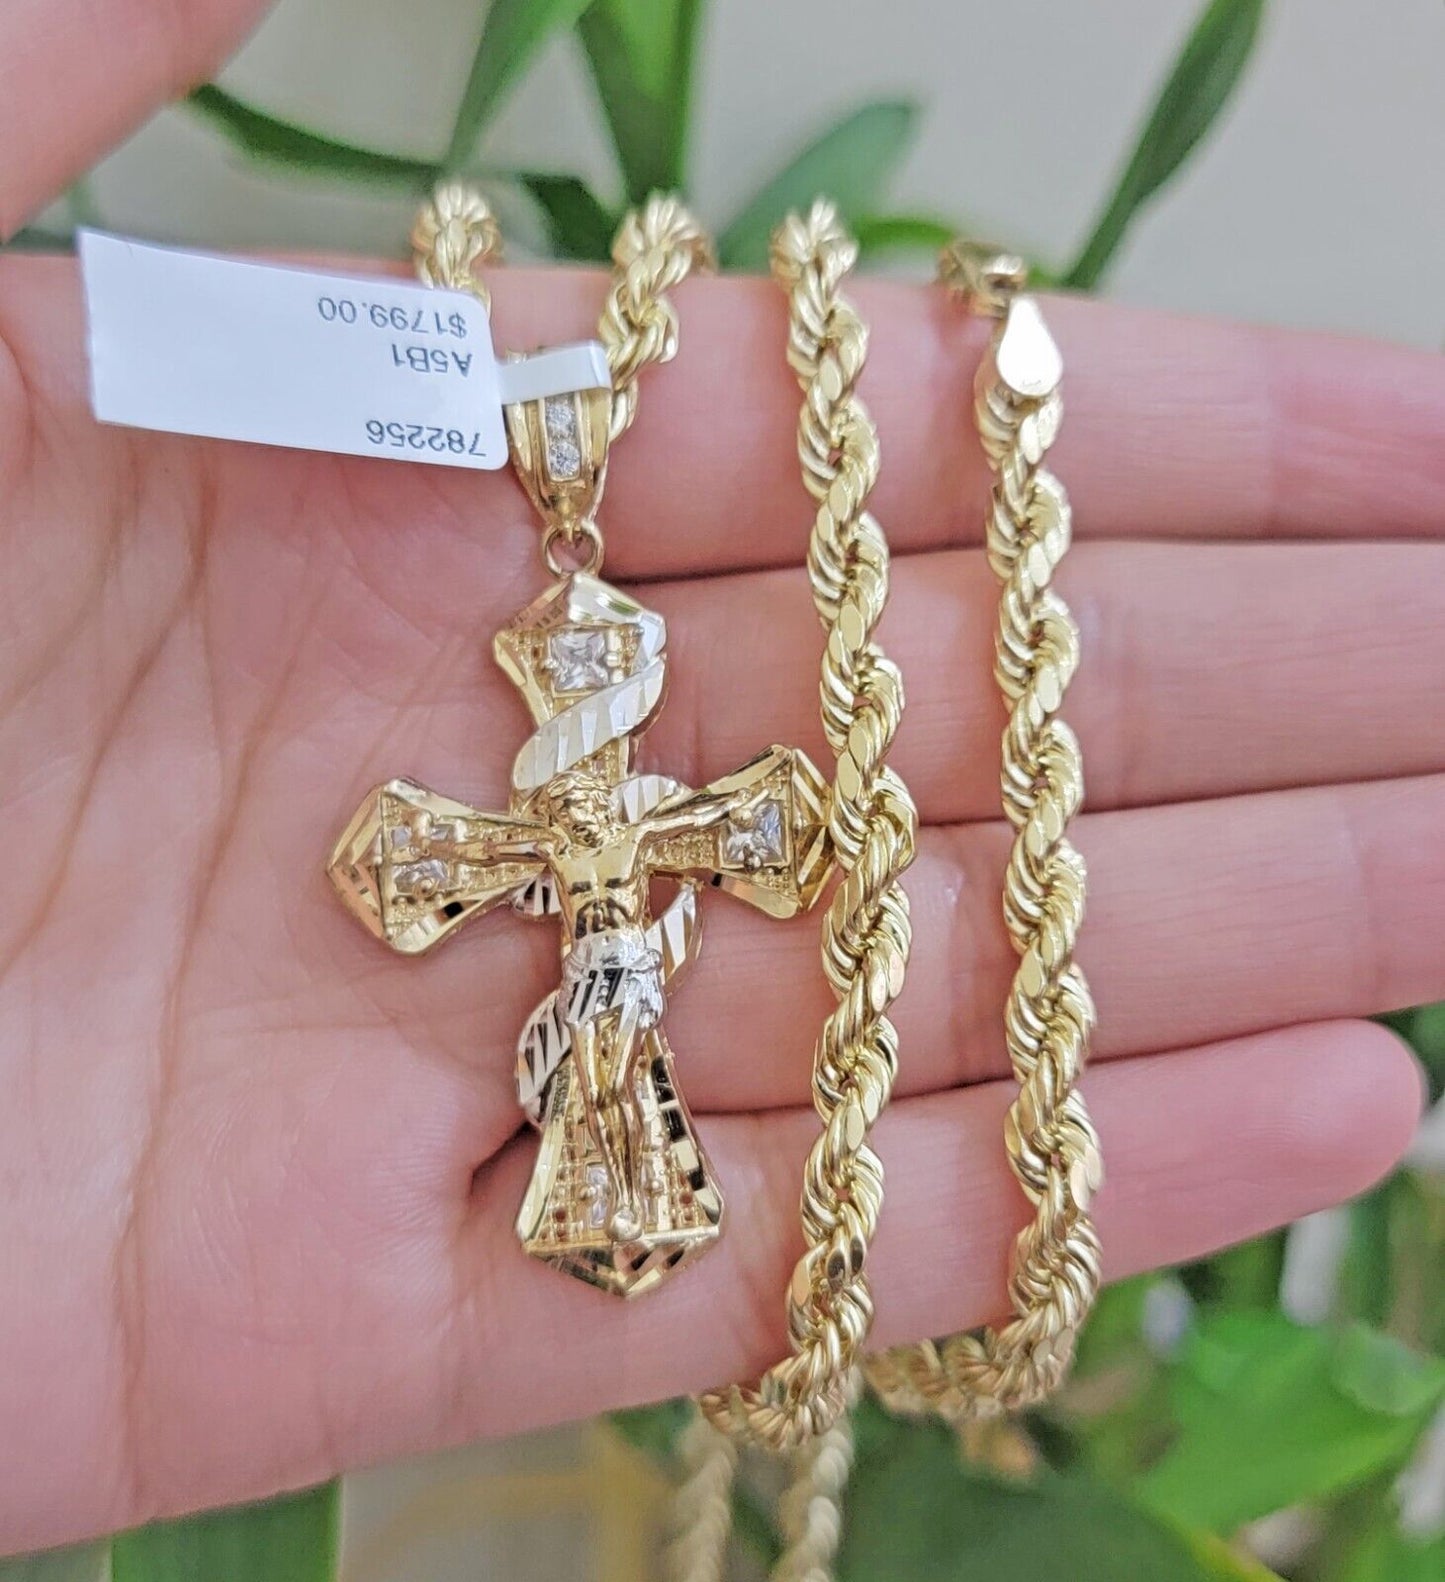 Real 10k Yellow Gold Rope Chain 5mm 24 inch Necklace & Jesus Cross Charm Pendant Set